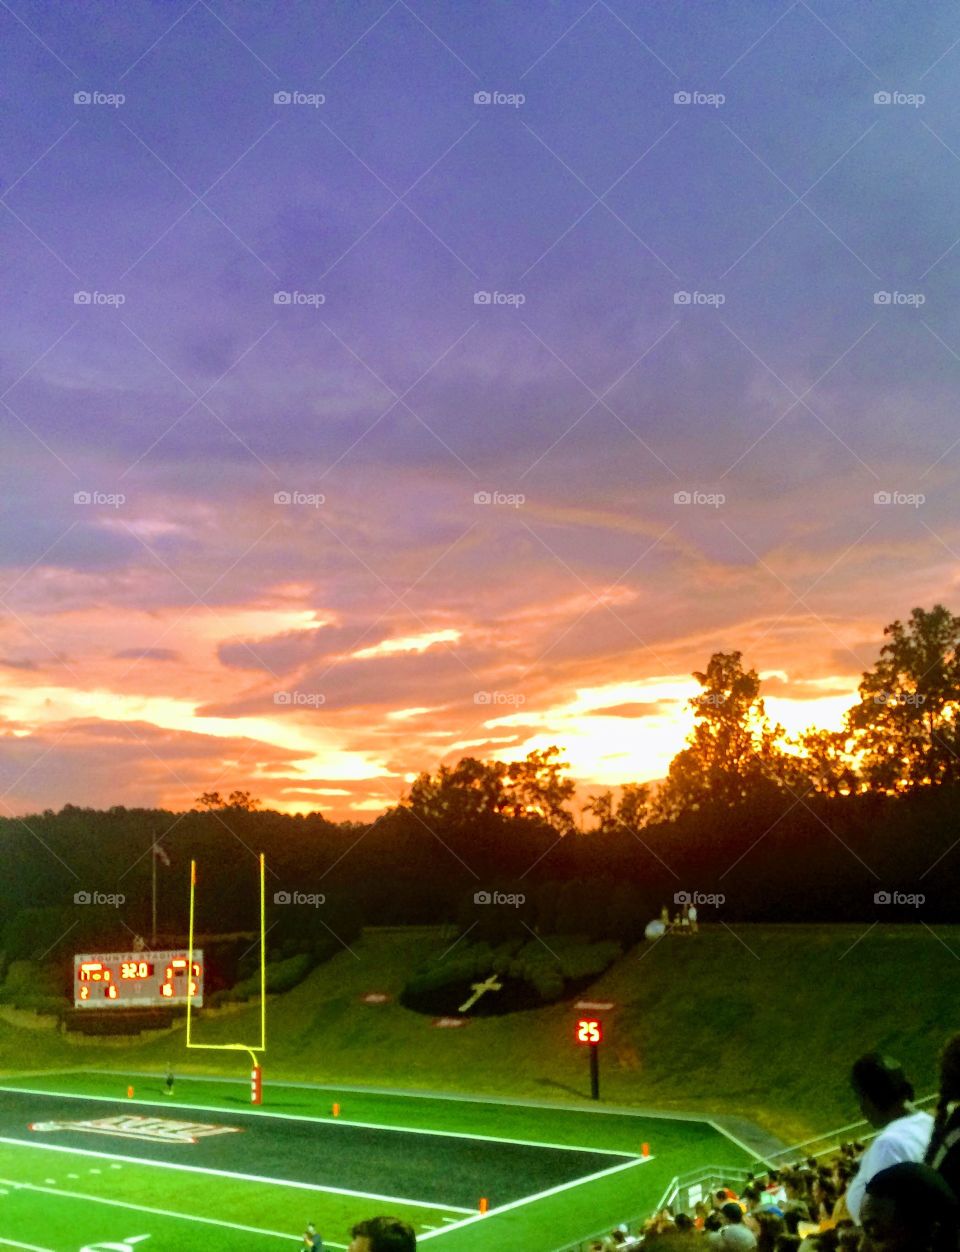 Sunset in the end zone